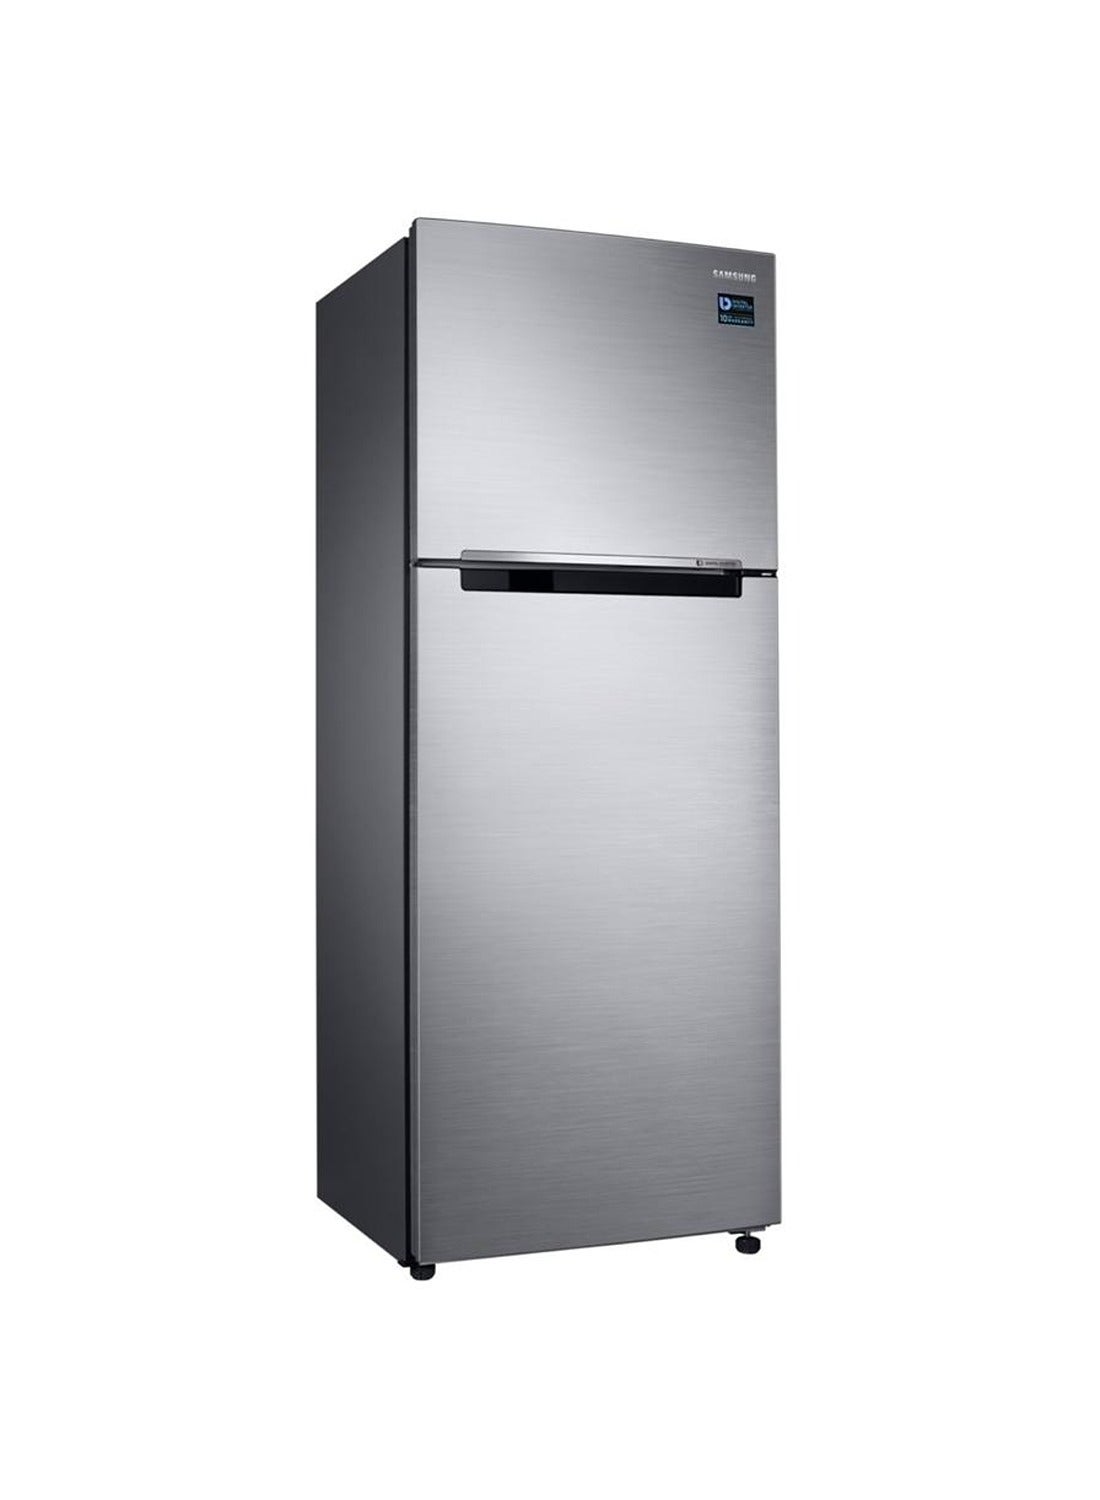 420 Liter Top Mount Refrigerator With Twin Cooling Net Capacity 0 W RT42K5030S8 Inox 